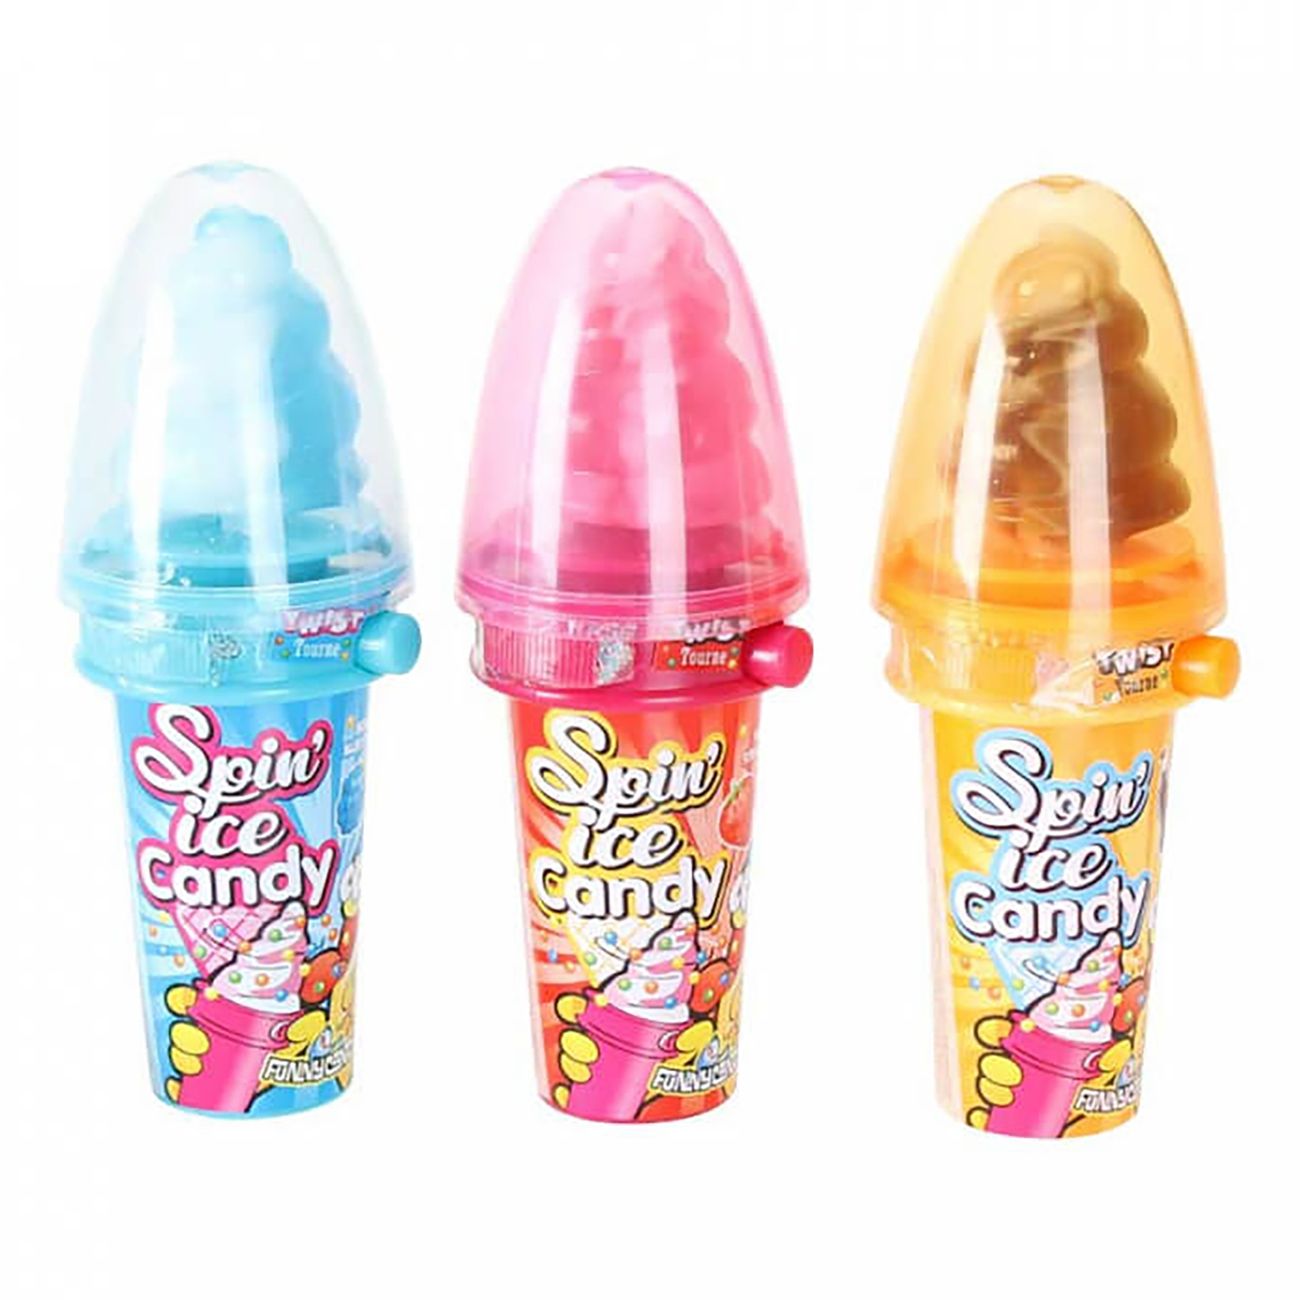 spin-ice-candy-24g-86311-1